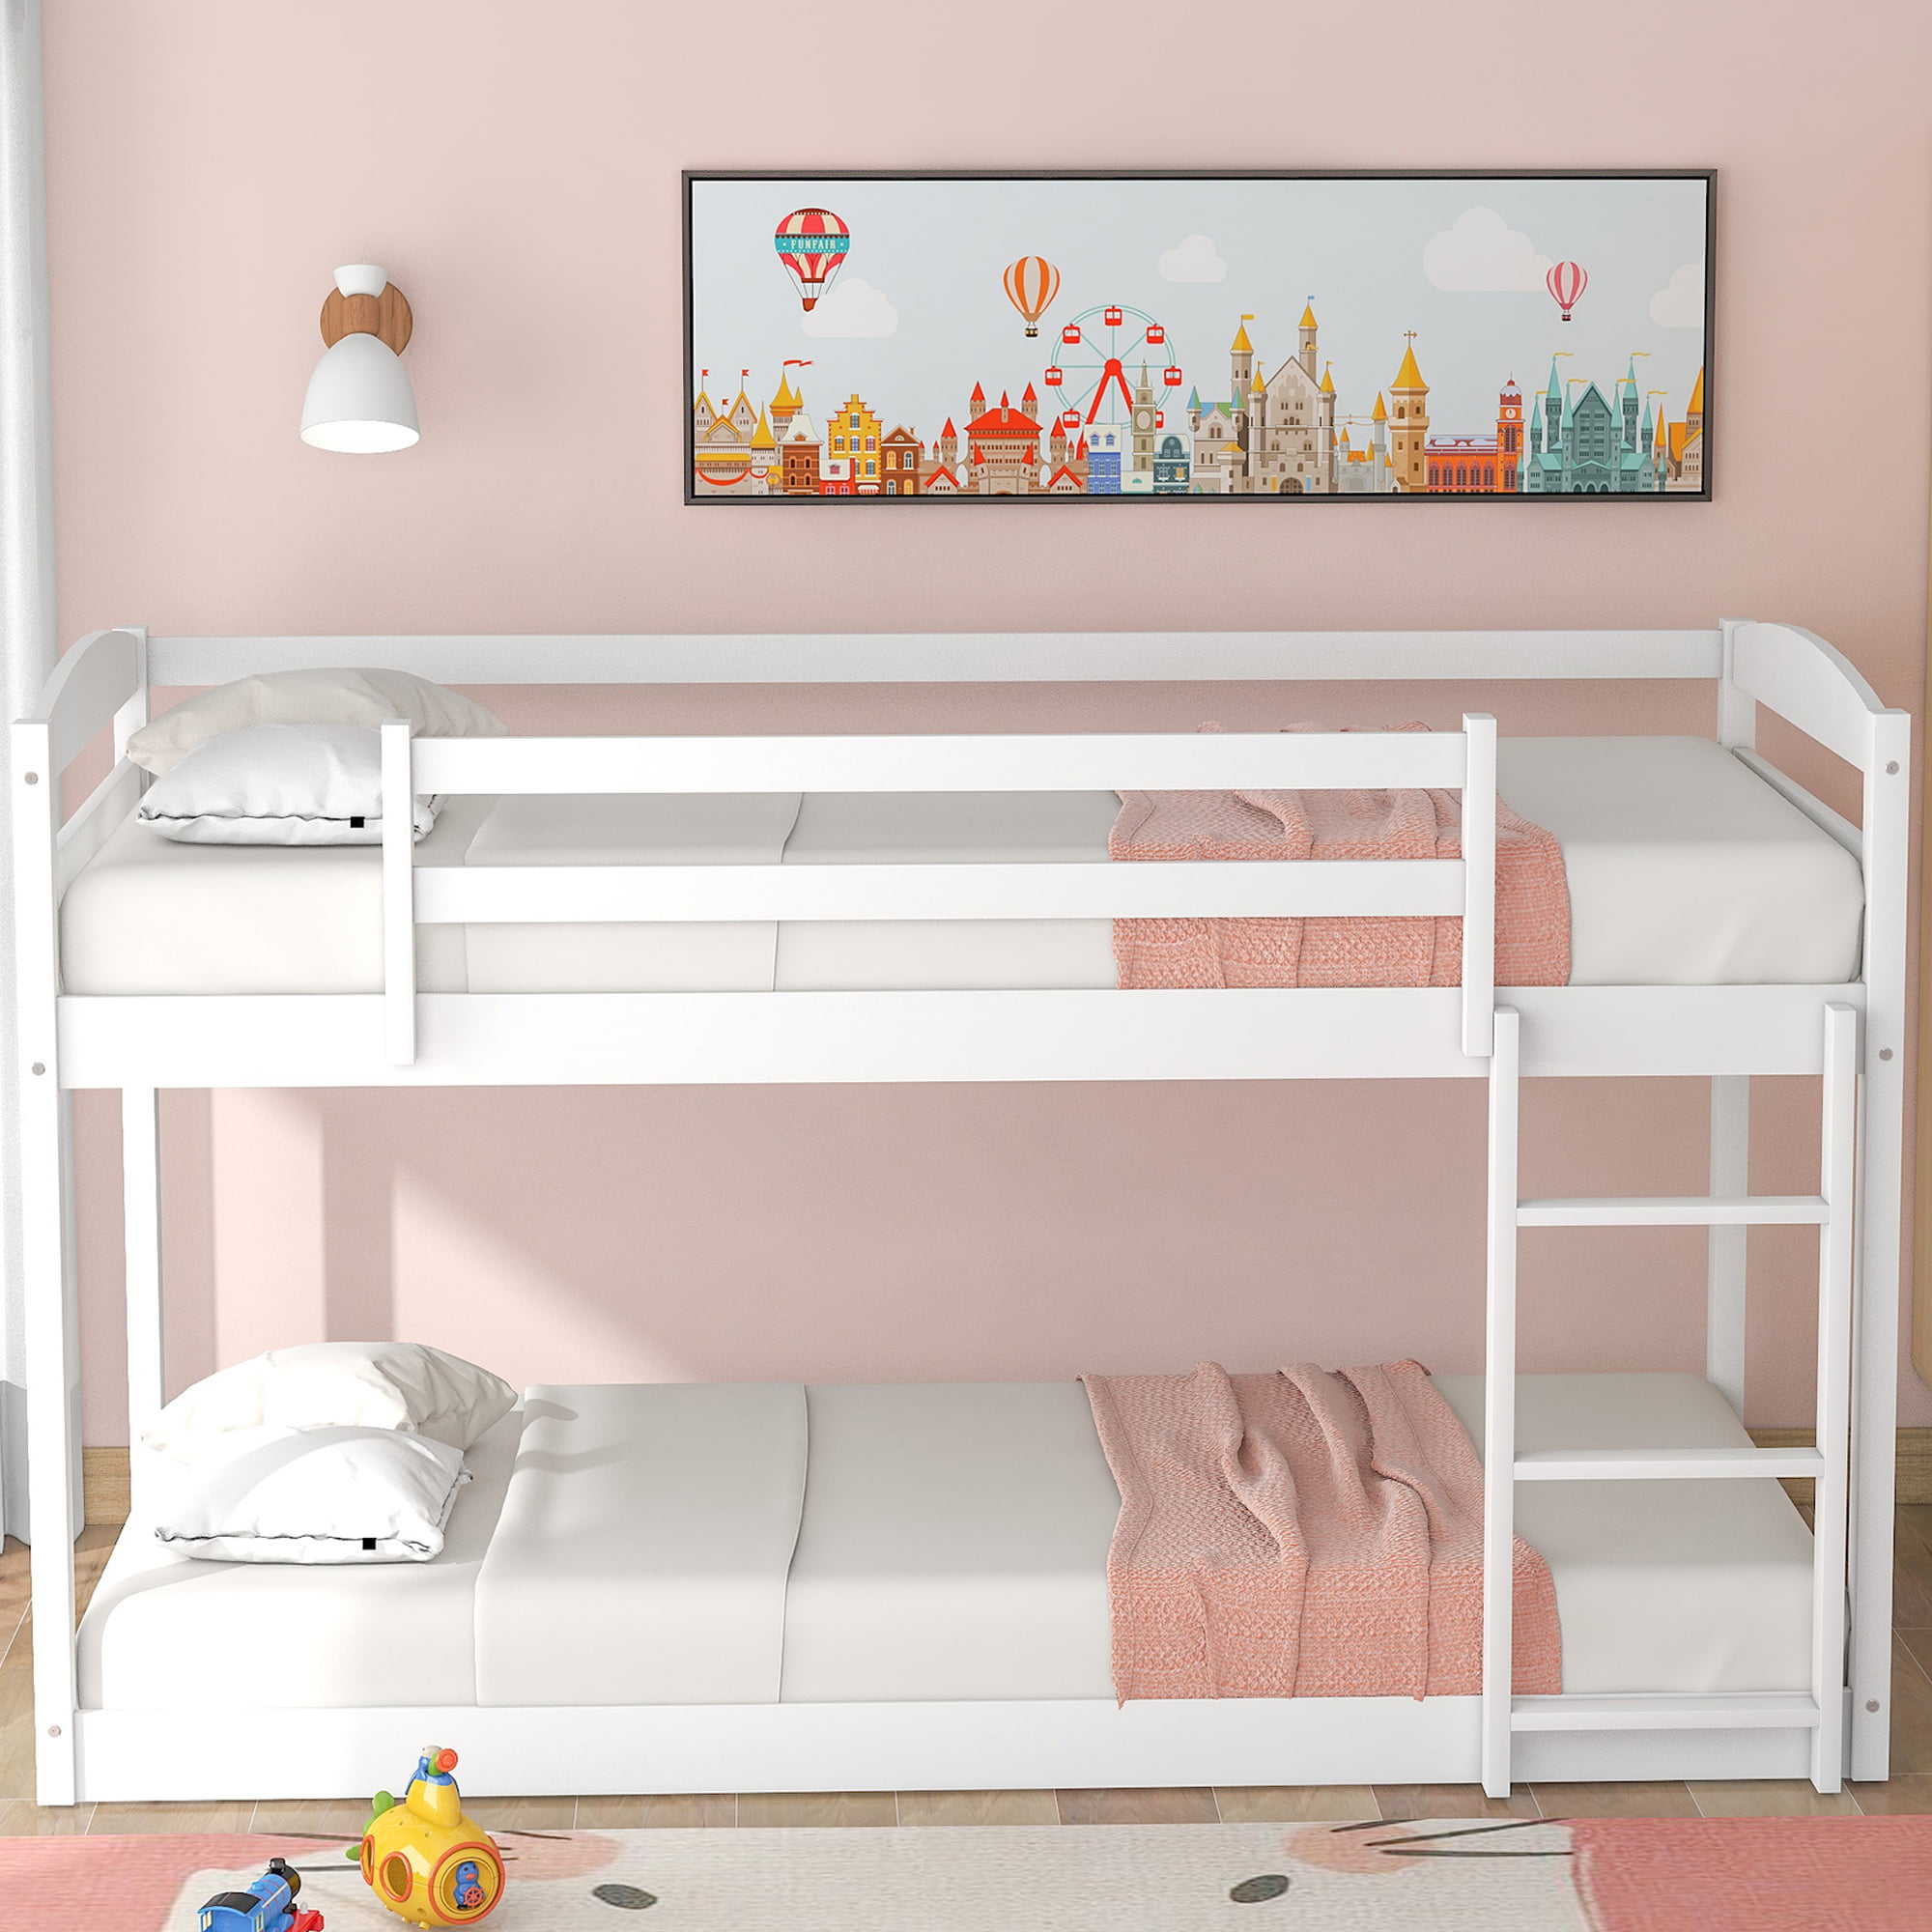 Bunk Beds For Kids Solid Wood Twin, Can Toddlers Sleep In Bunk Beds